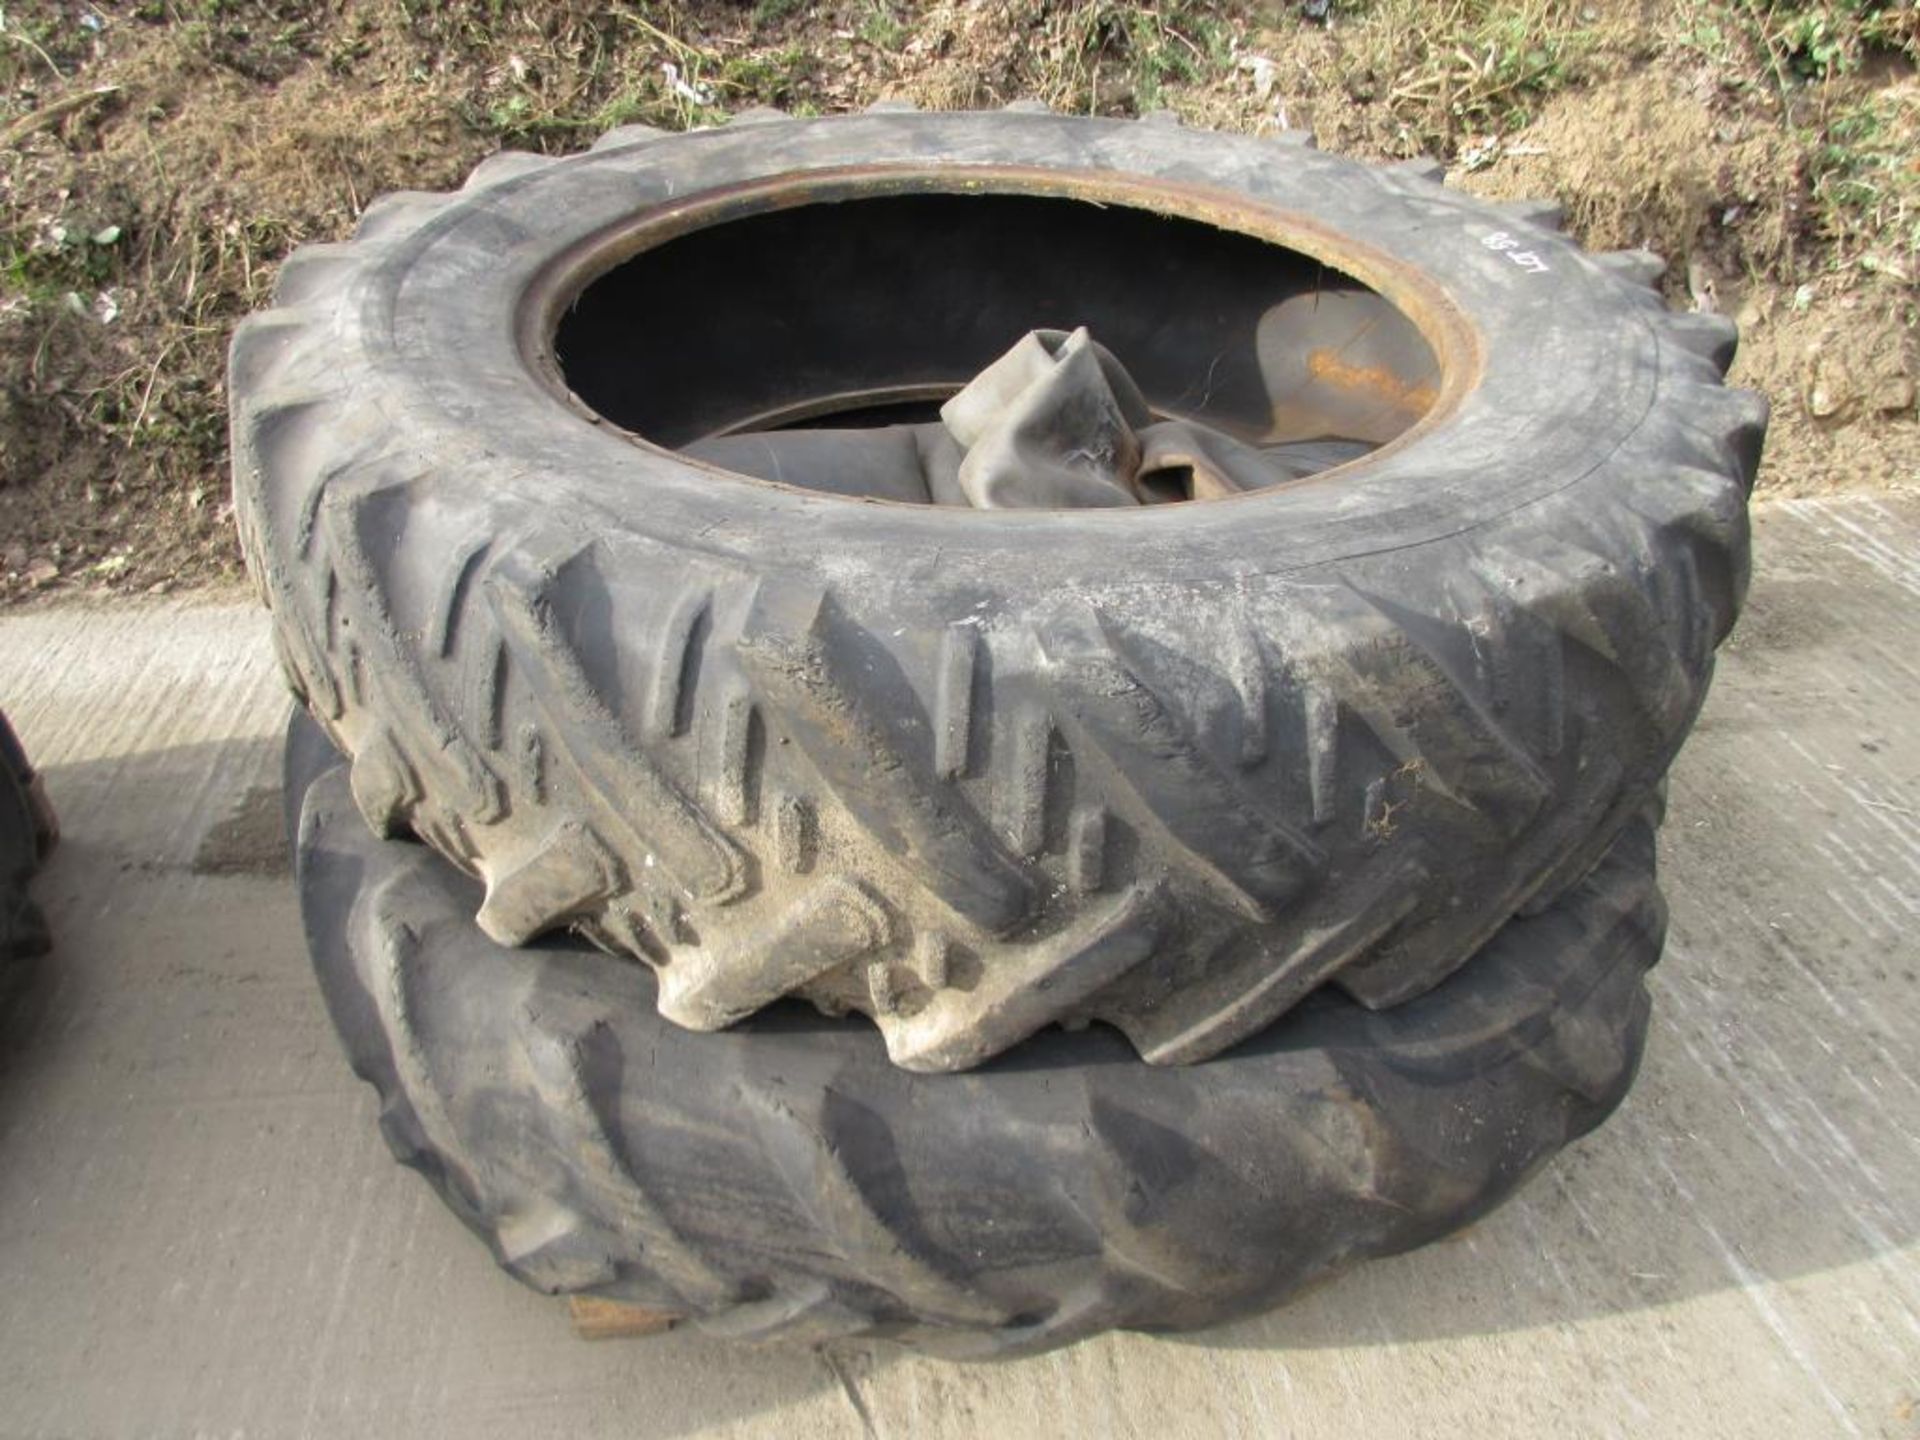 2no. 16.9-38 rear tractor tyres and inner tubes